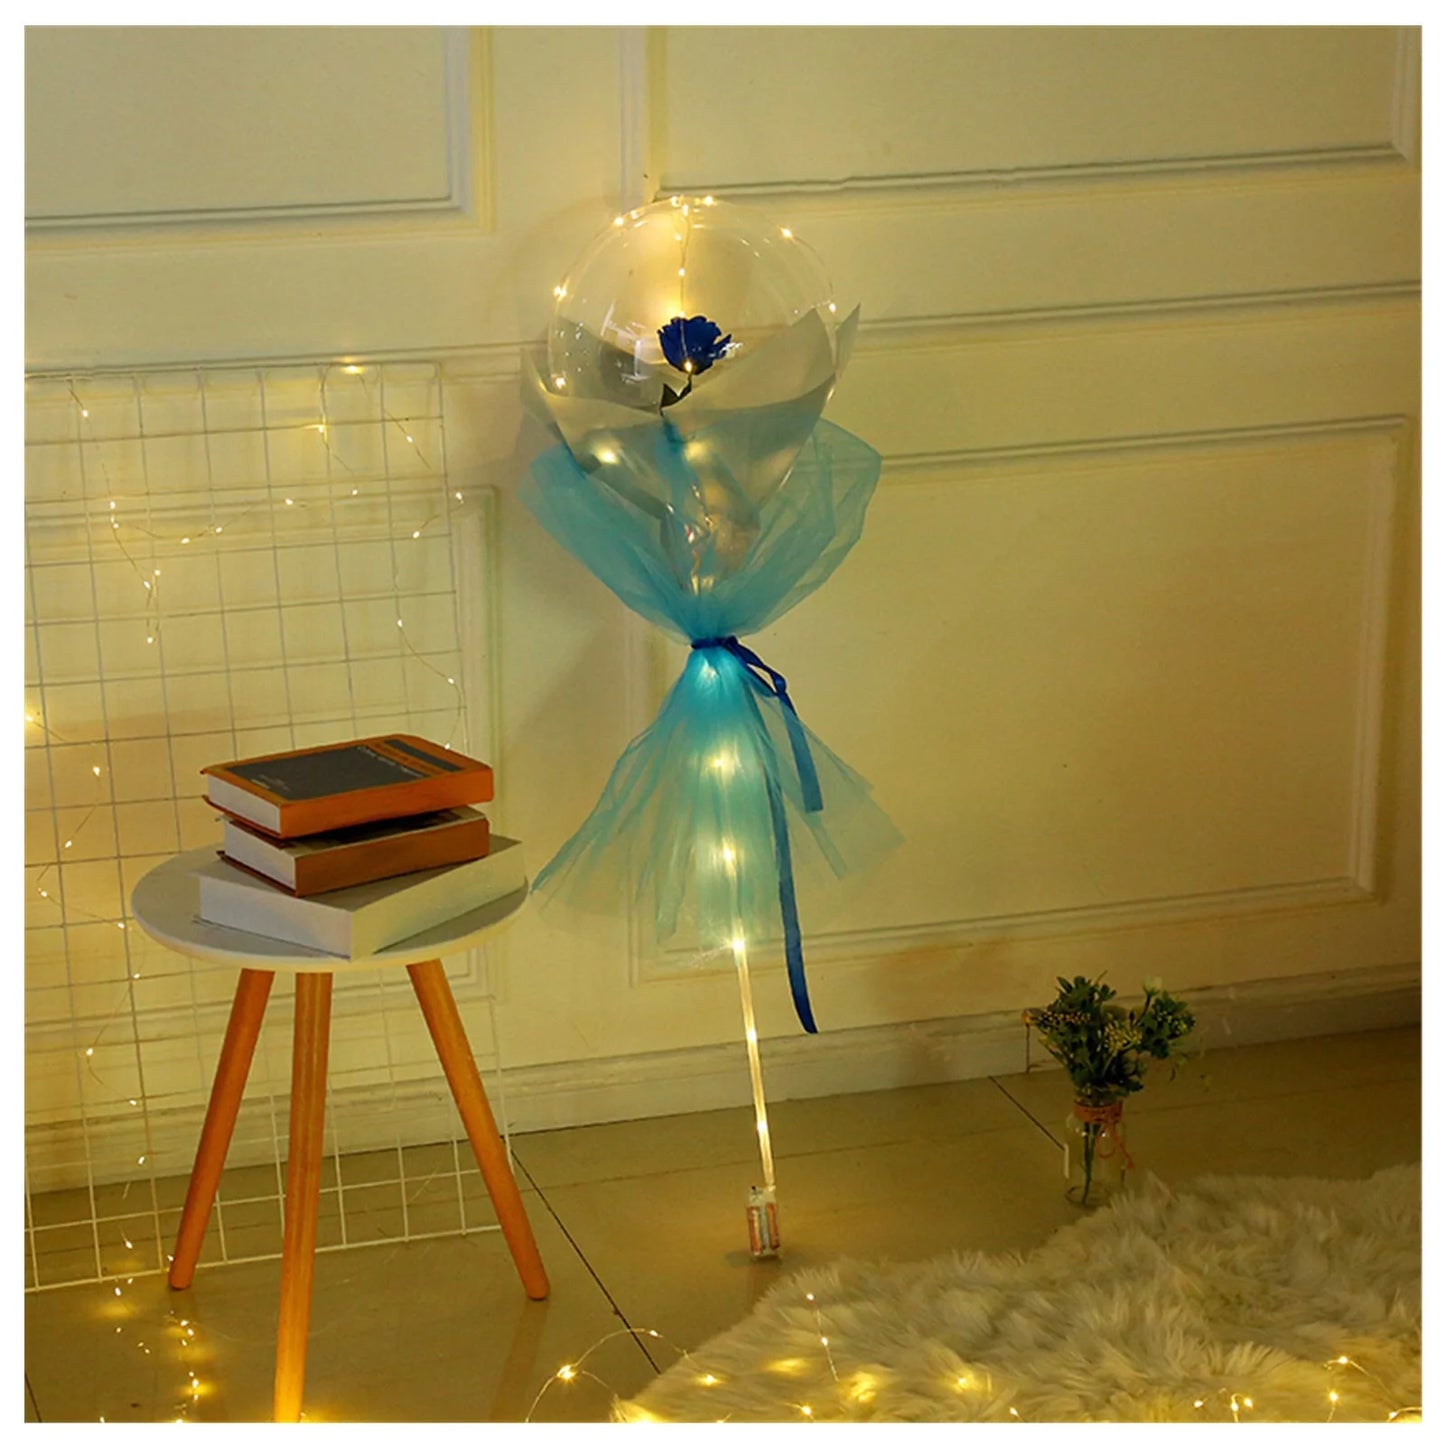 LED Luminous Balloon Rose Bouquet: Perfect for Valentine's Day, birthdays, weddings, and parties